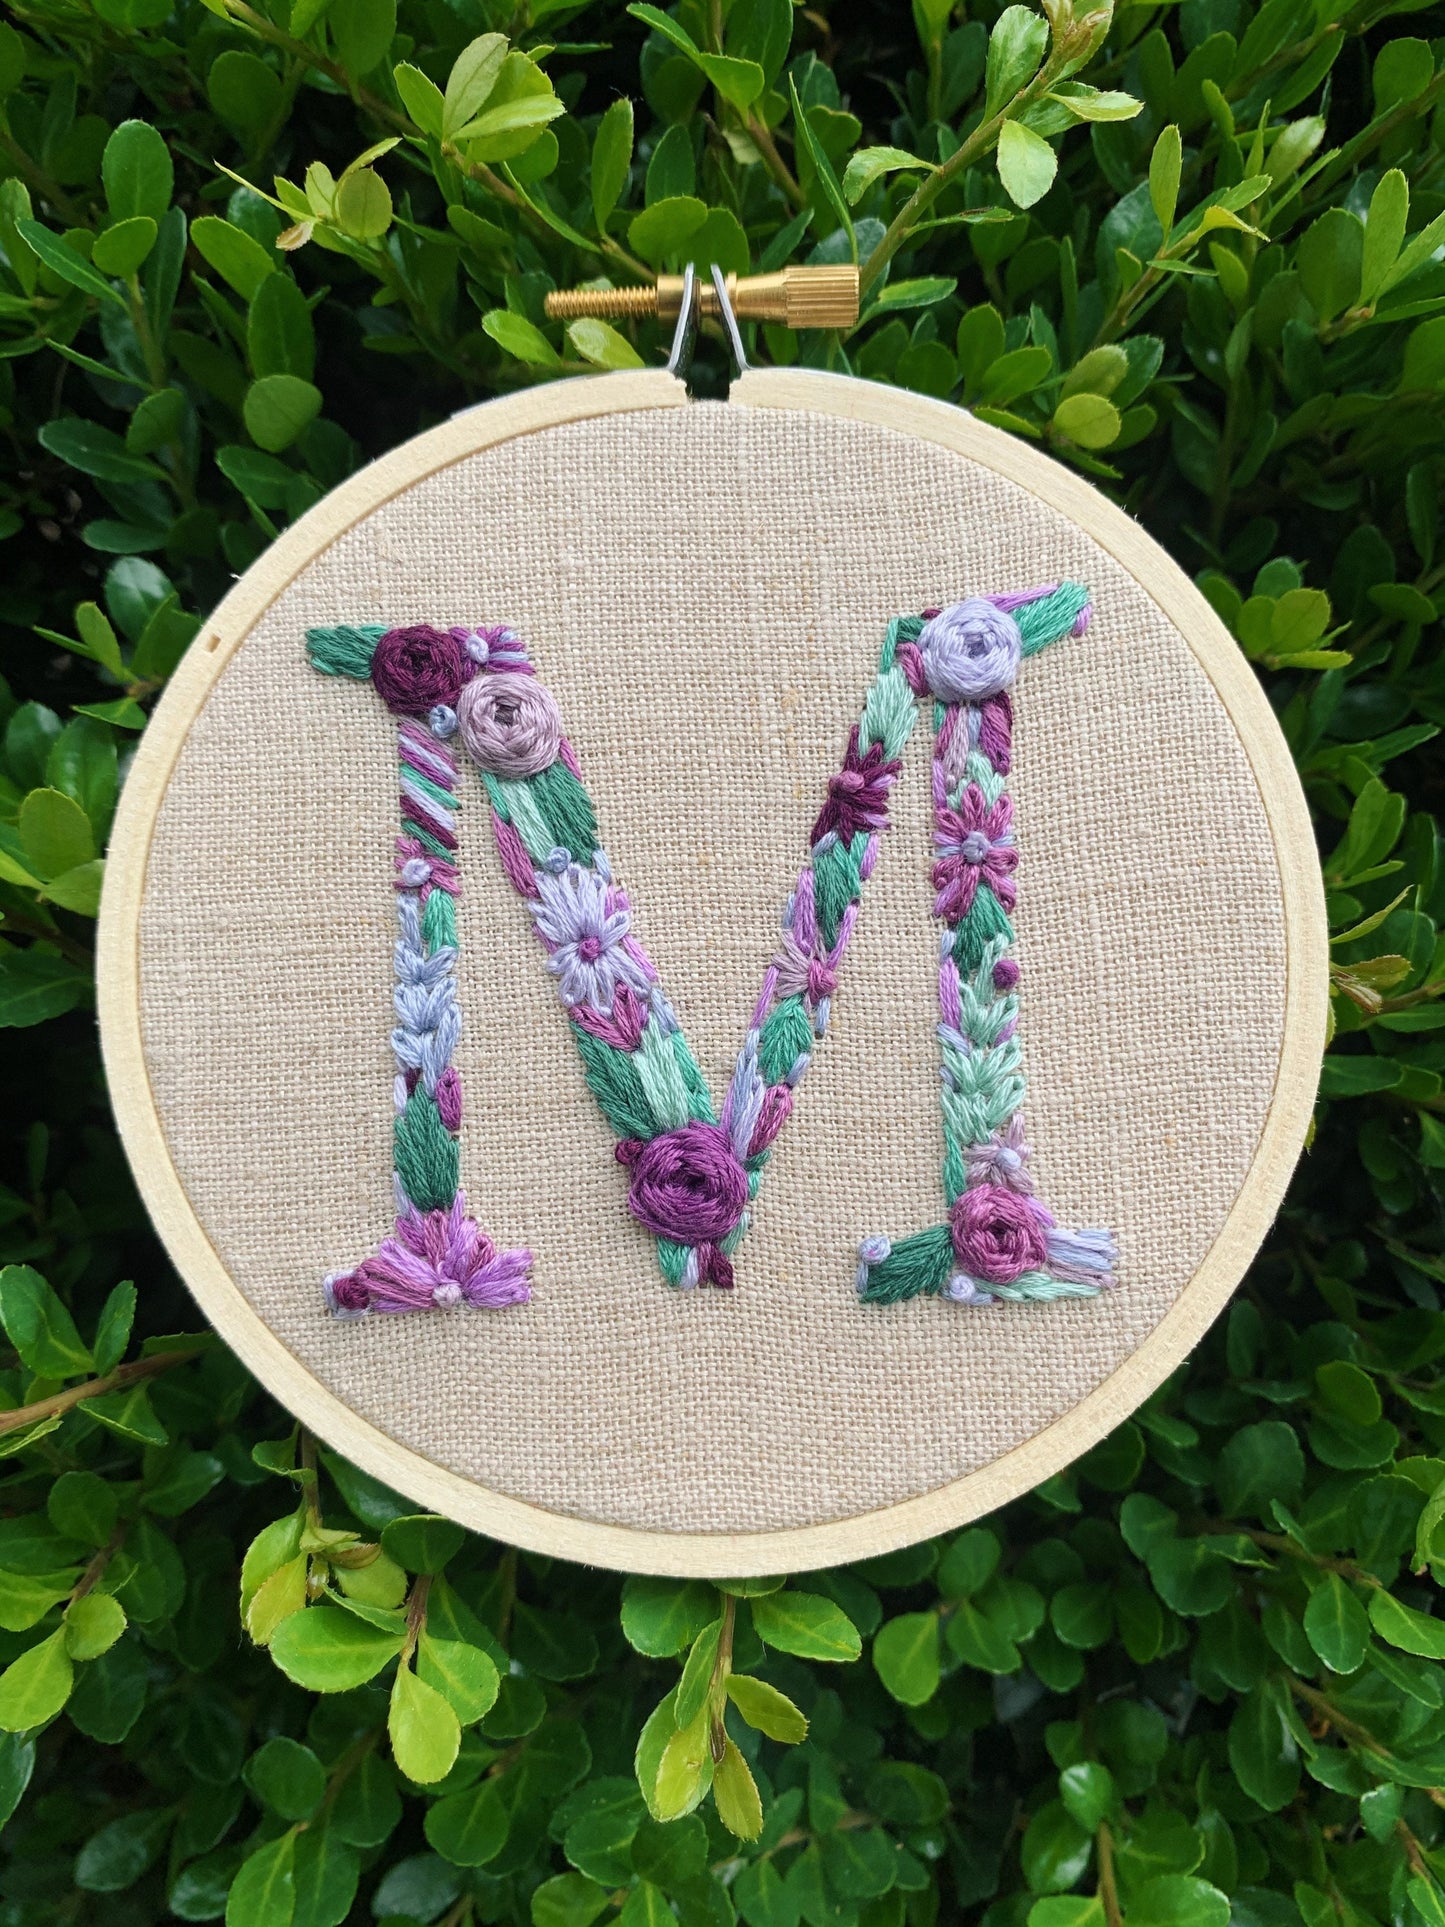 PDF Pattern - Letter M Floral Monogram Embroidery